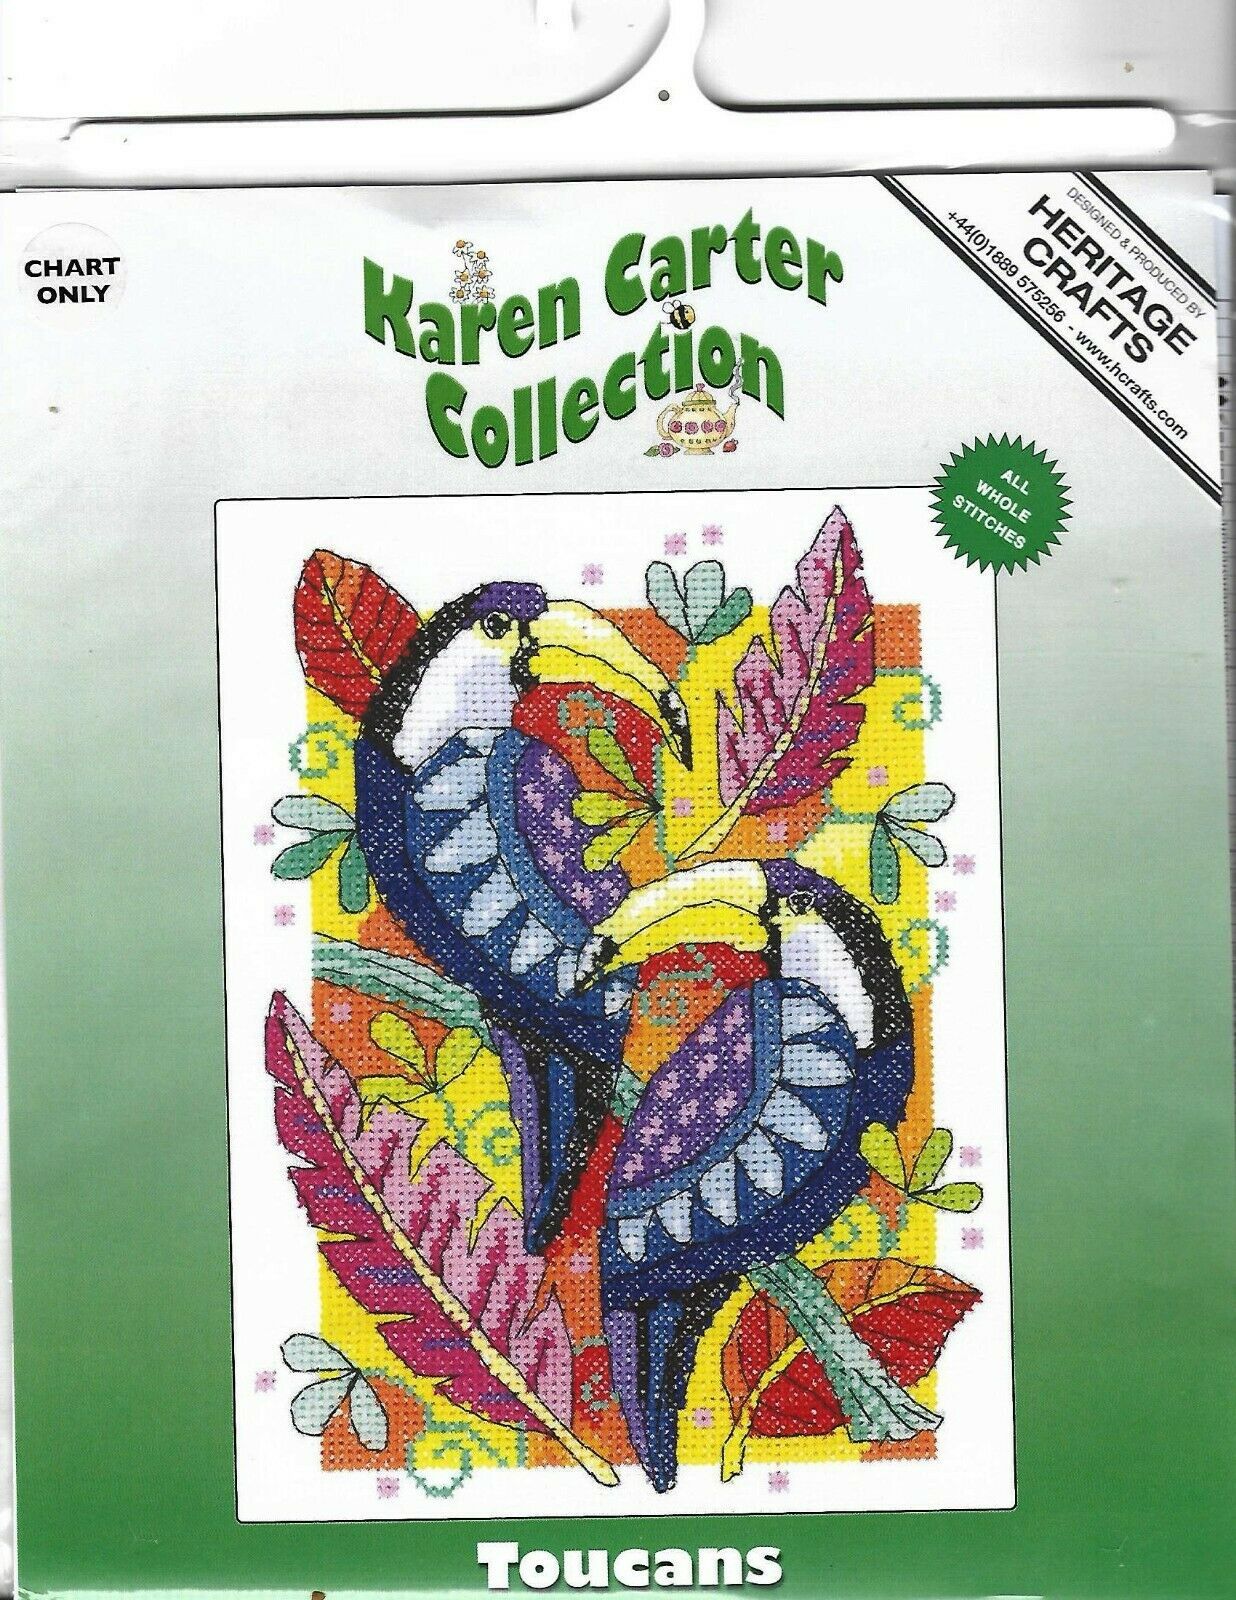 Primary image for CROSS STITCH KIT "TOUCANS" Karen Carter Collection by Heritage Crafts